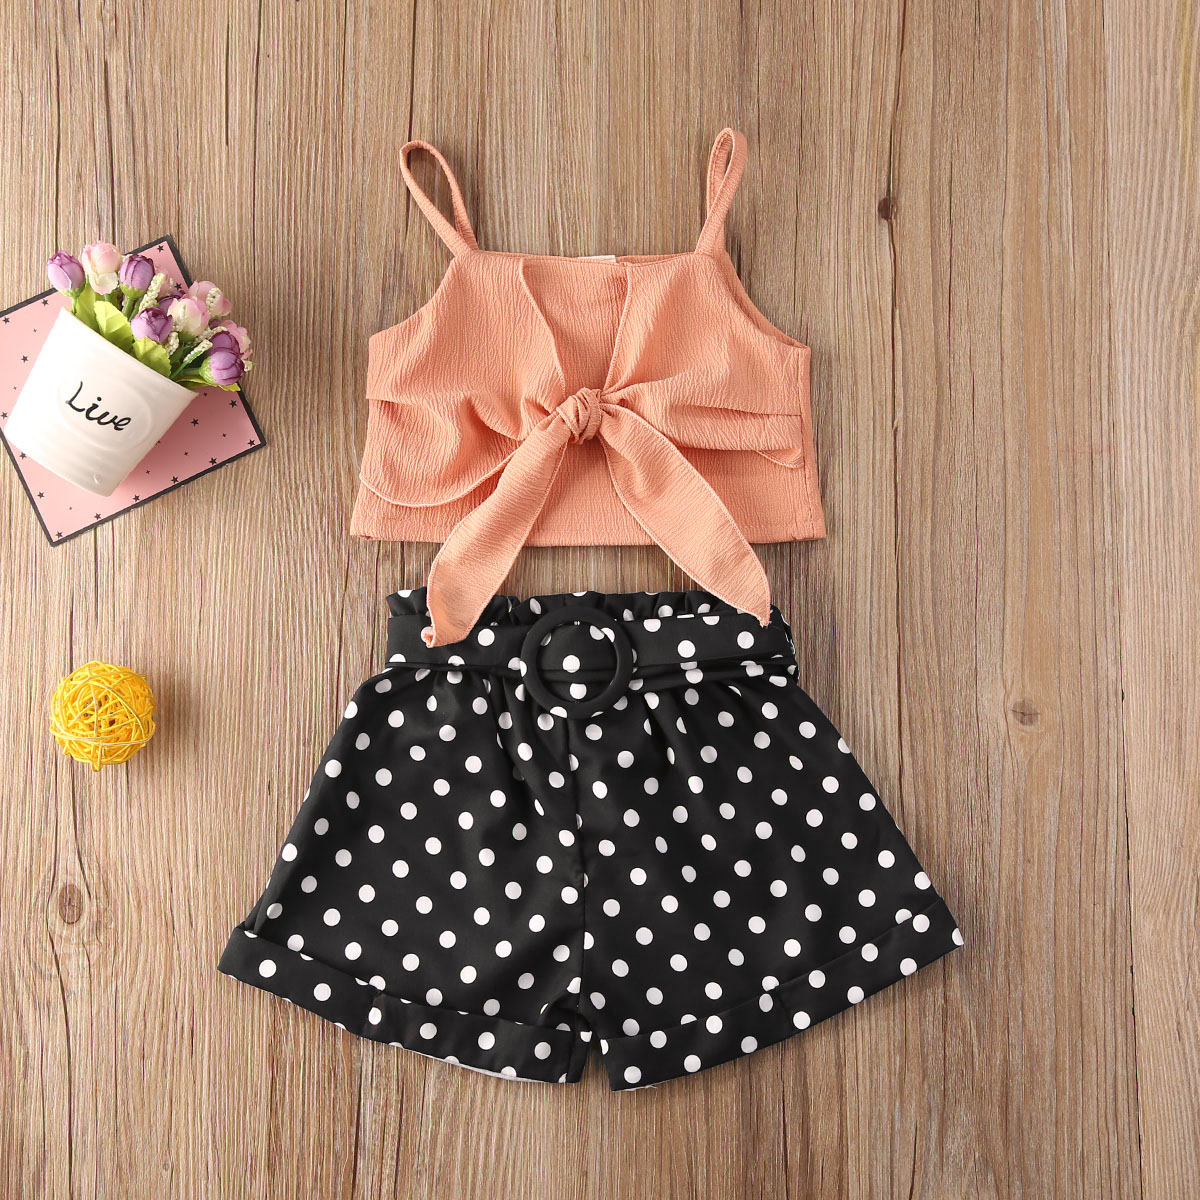 Citgeett Summer Kids 1-6T Baby Girls Fashion Clothes Bow Vest Crops Tops Polka Dot Shorts With Belt Sunsuit